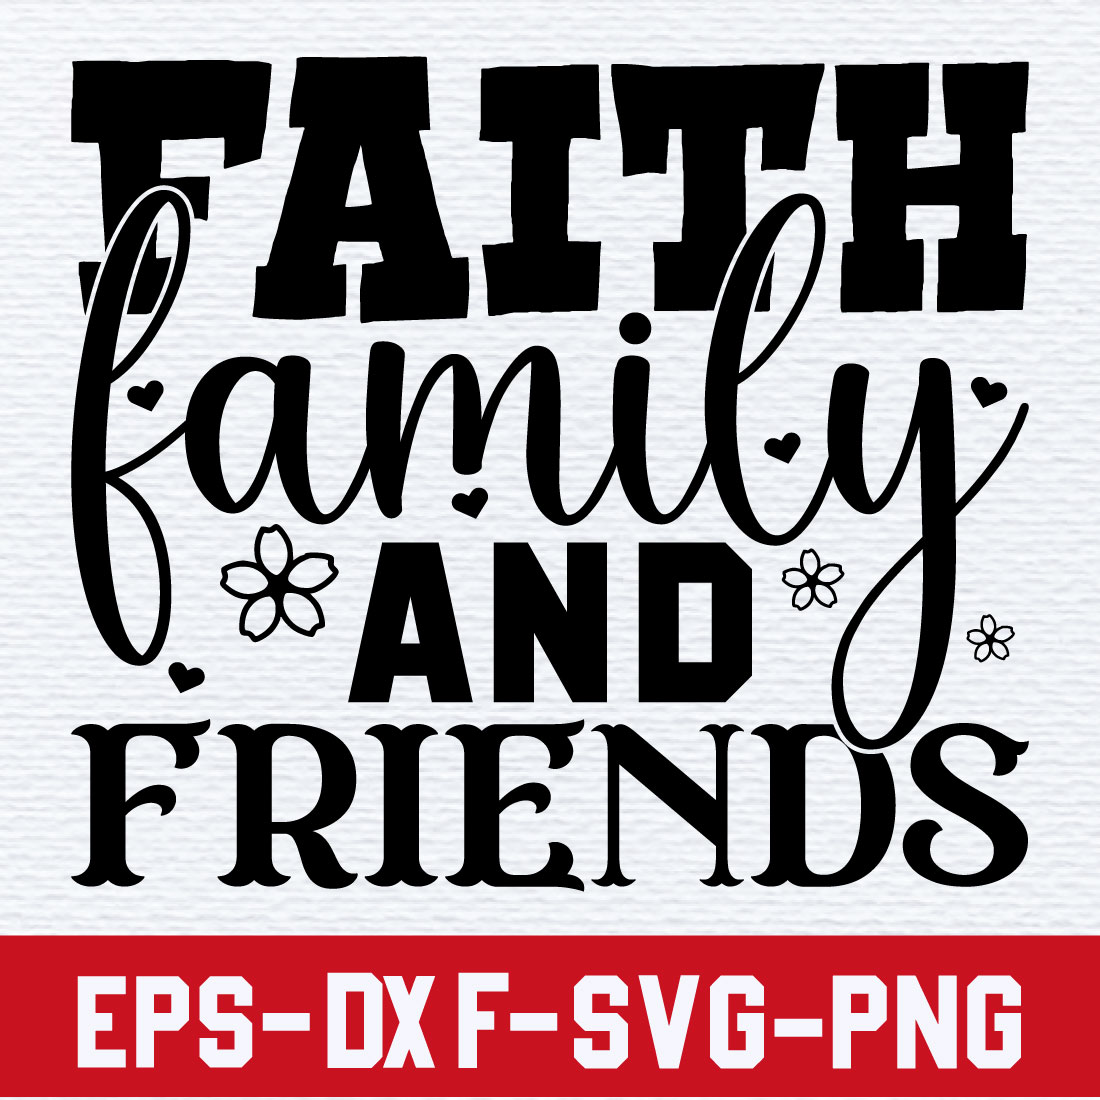 Faith family and friends cover image.